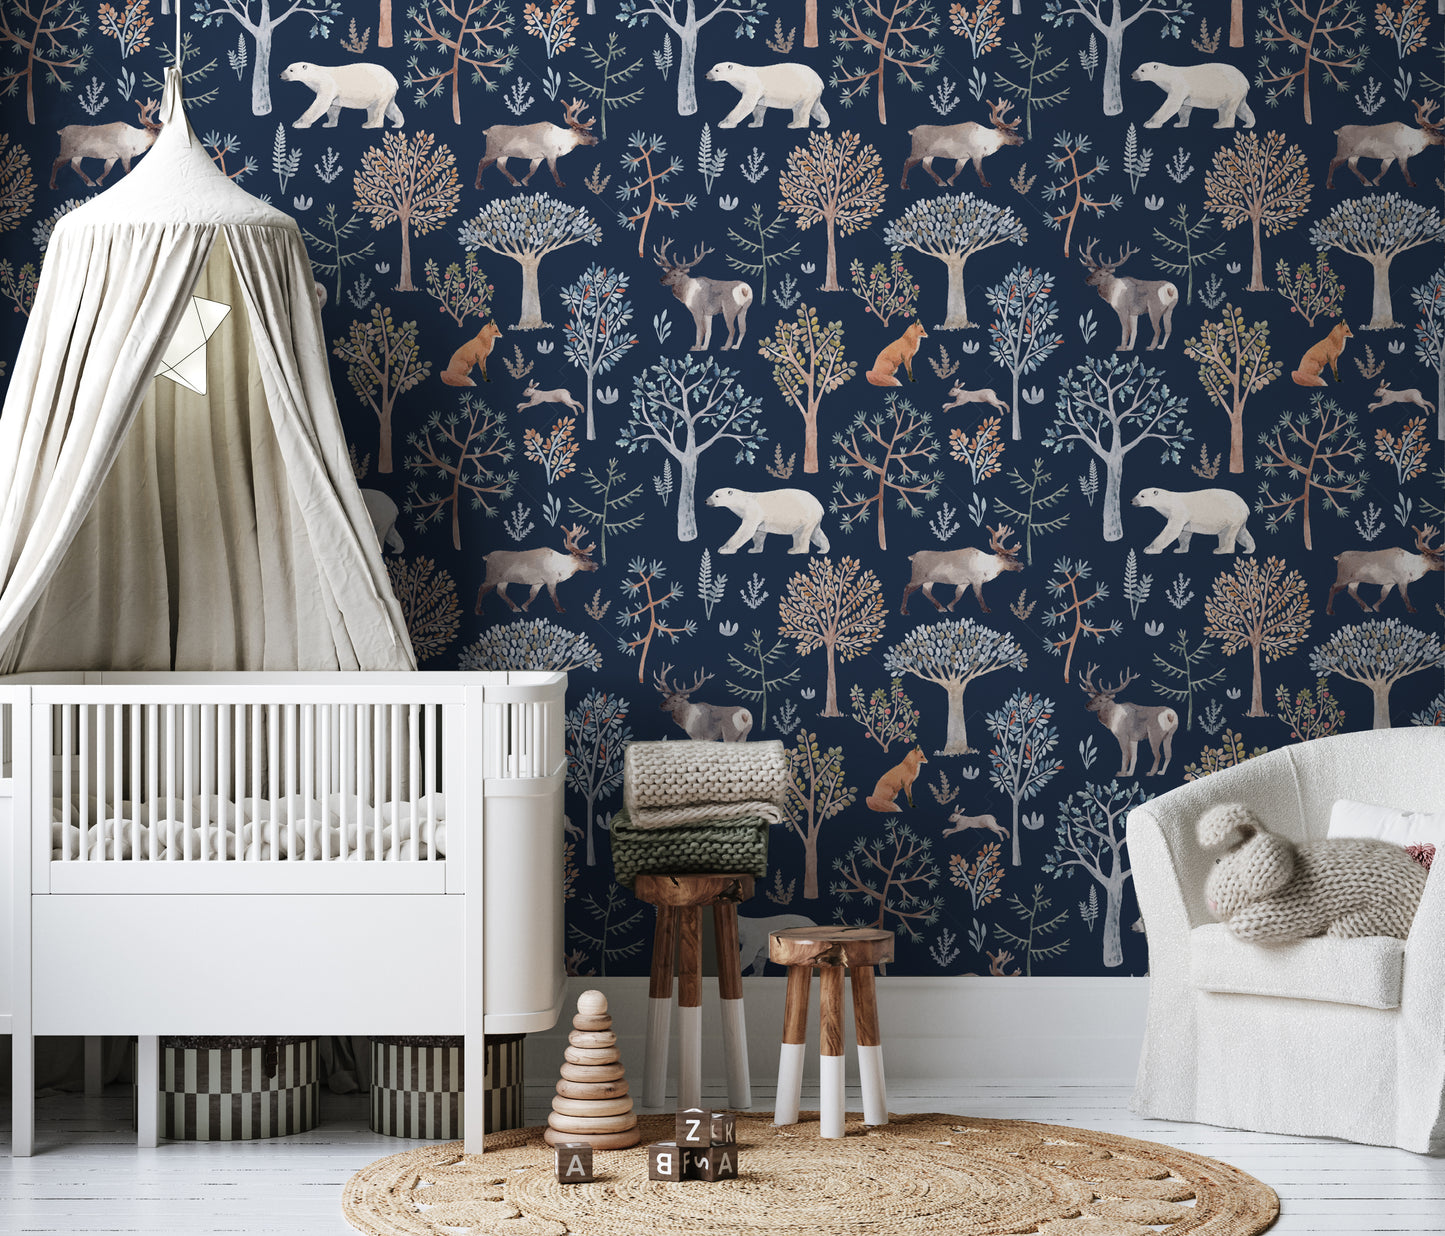 Woodland Bear Fox And Moose Removable Peel And Stick Wallpaper